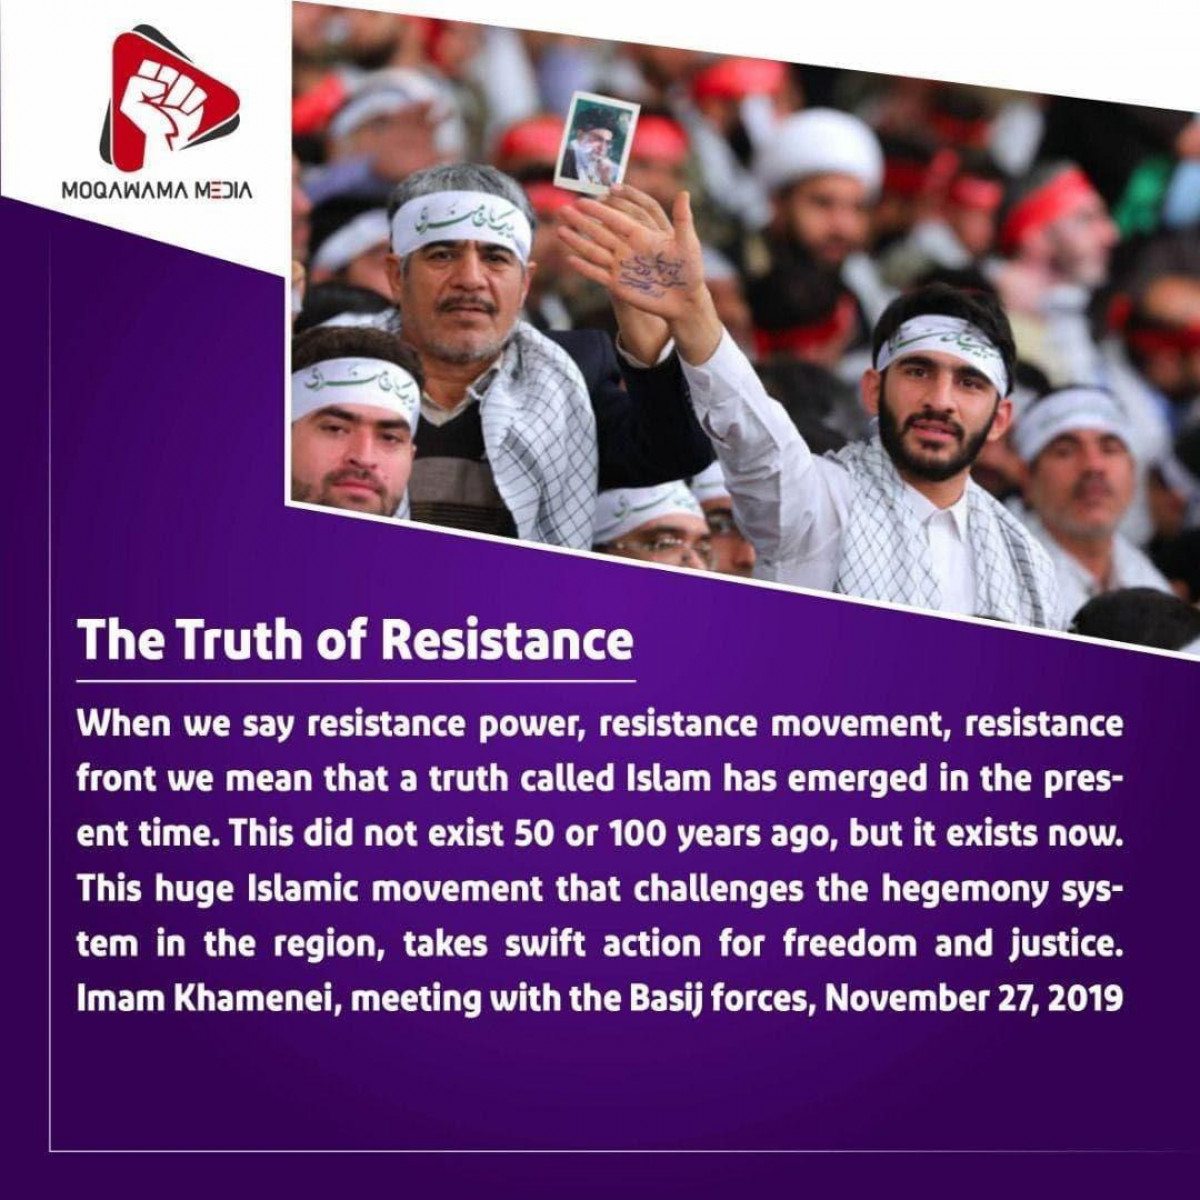 The Truth of Resistance 1